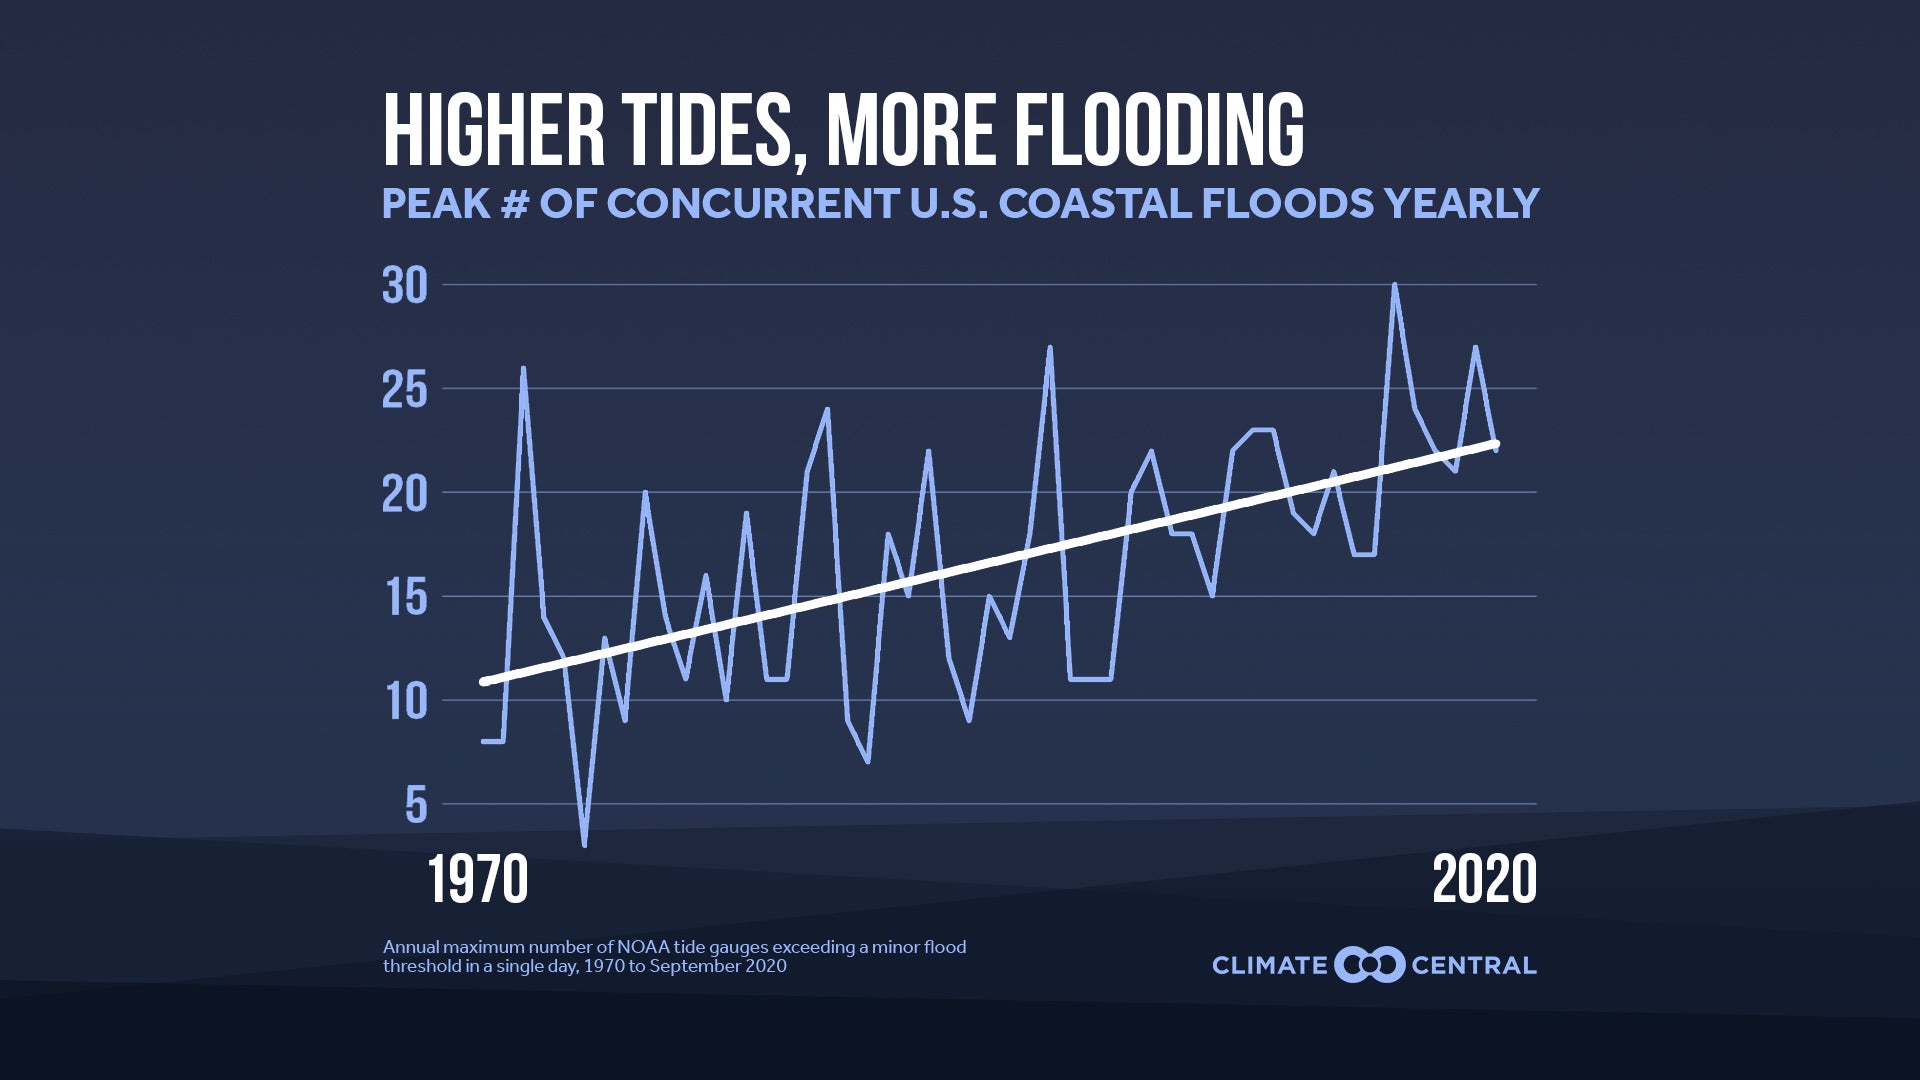 Graphic shows a line graph against a dark blue background with the headline "Higher Tides, More Flooding." The graph shows an increase in the peak number of concurrent U.S. coastal floods per year from 1970 to 2020. Graphic created by Climate Central.